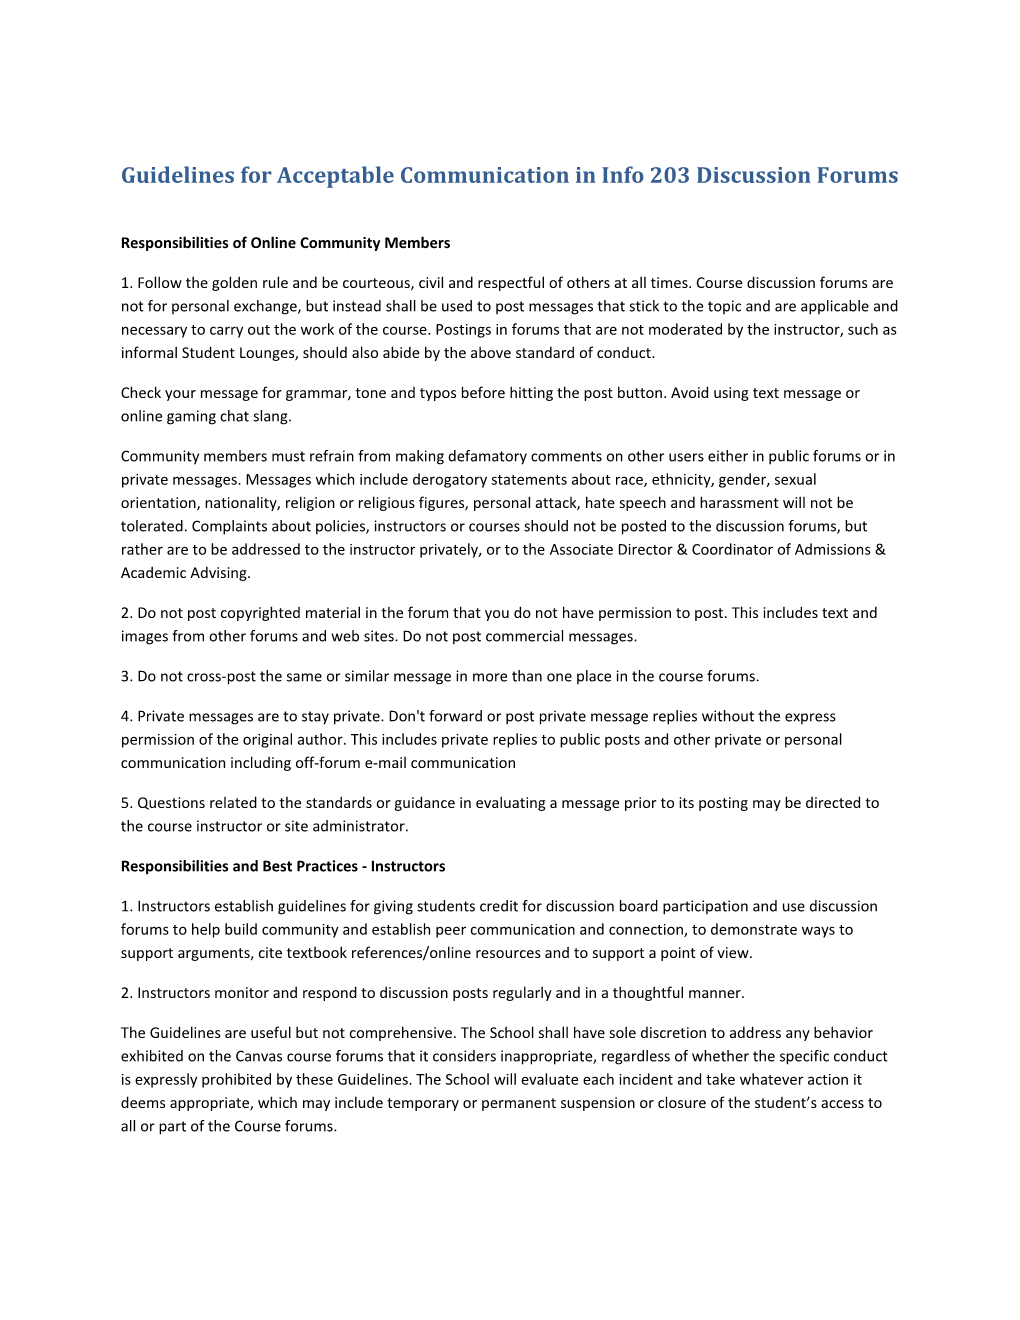 Guidelines for Acceptable Communication in Info 203Discussion Forums